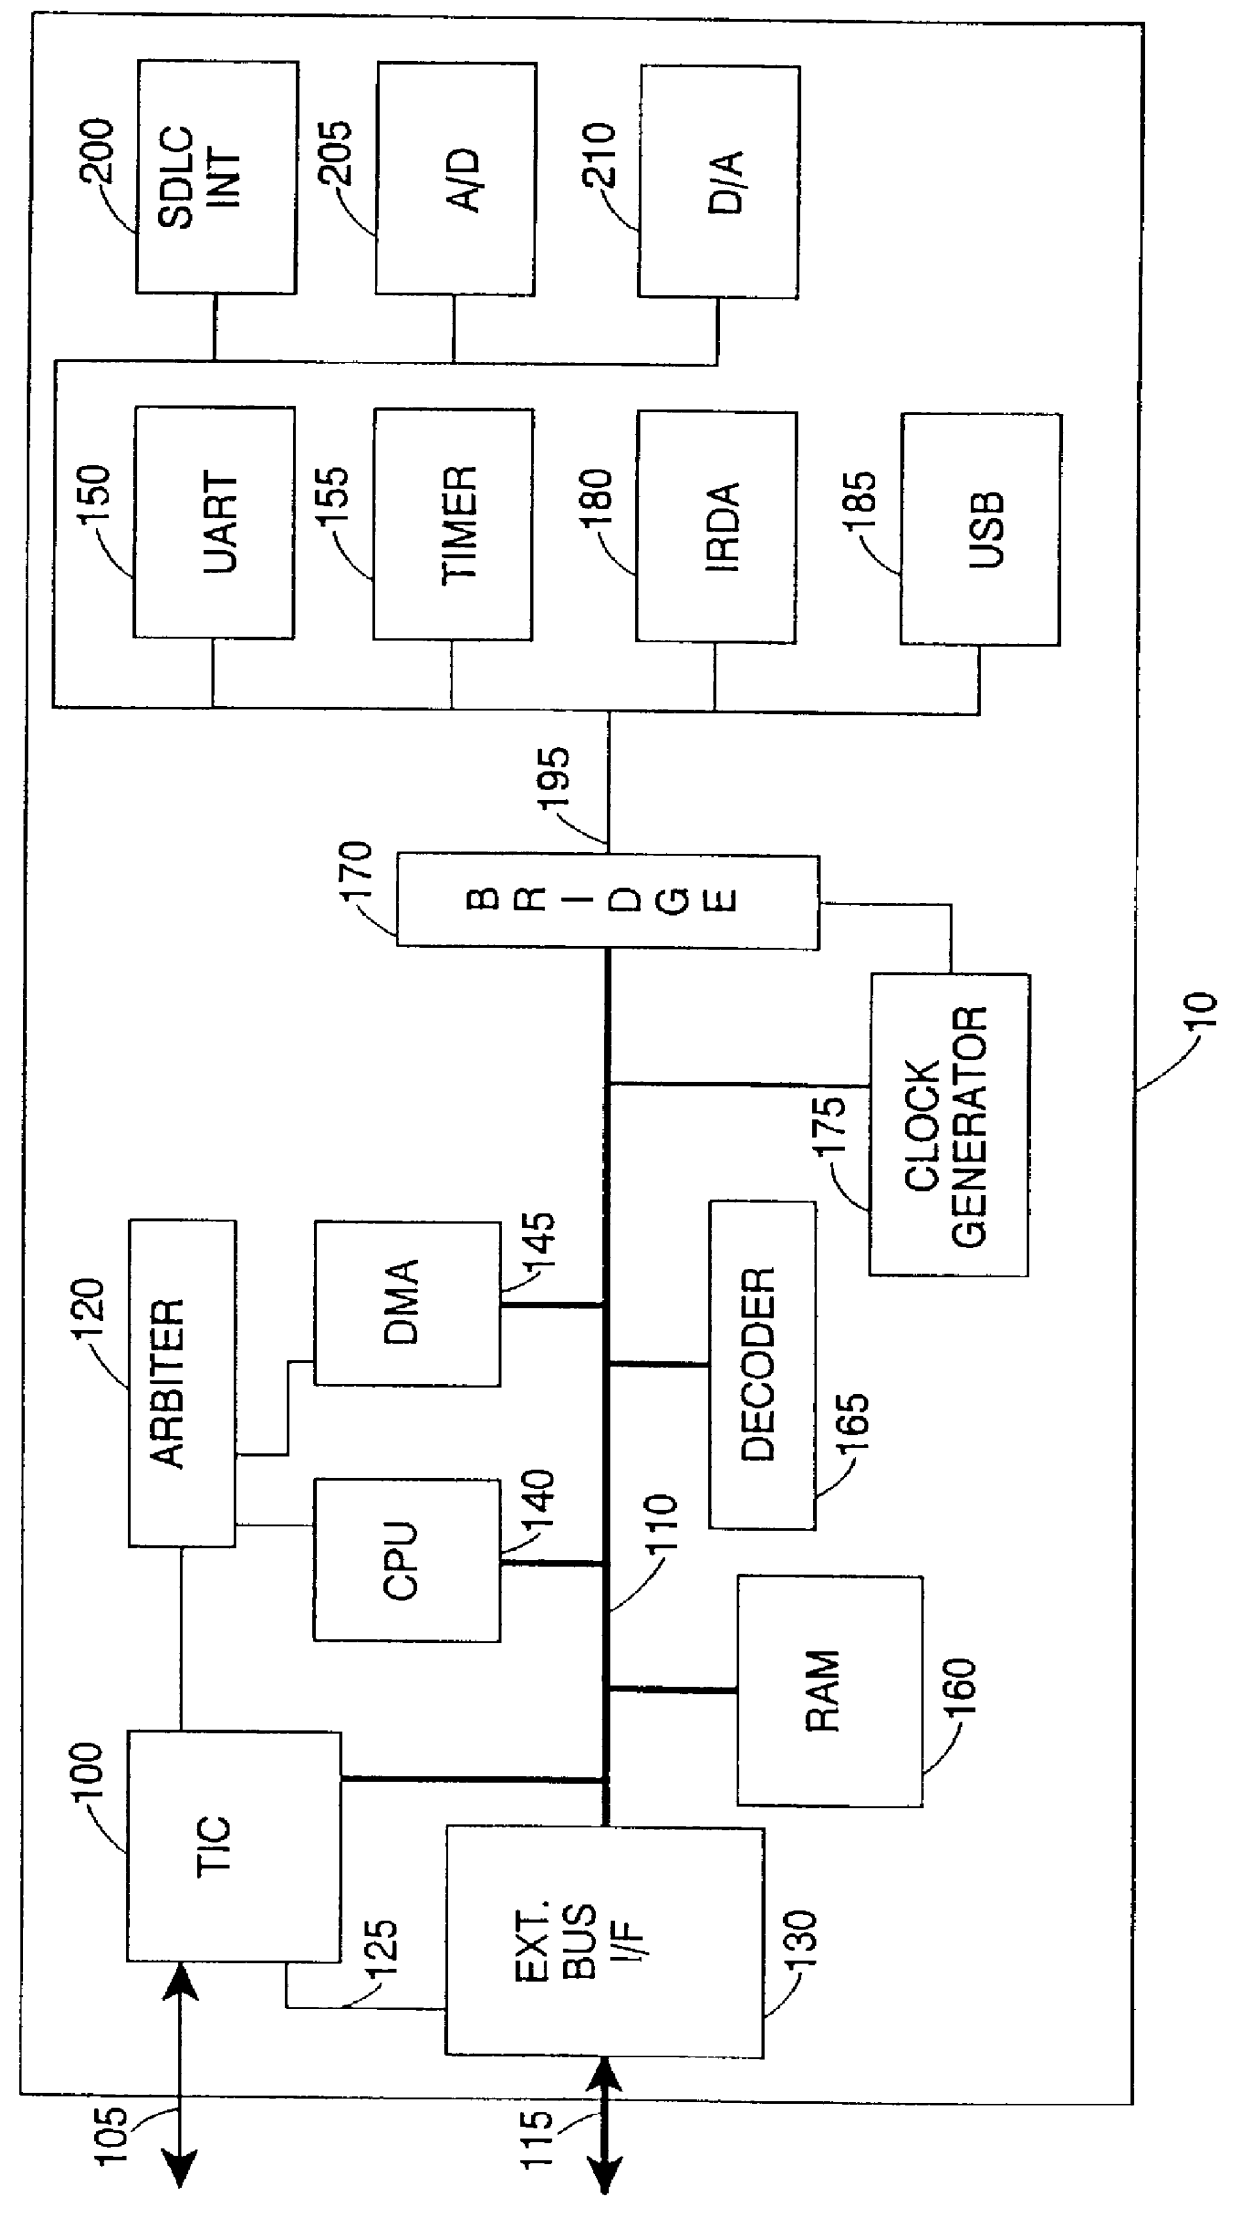 Peripheral buses for integrated circuit